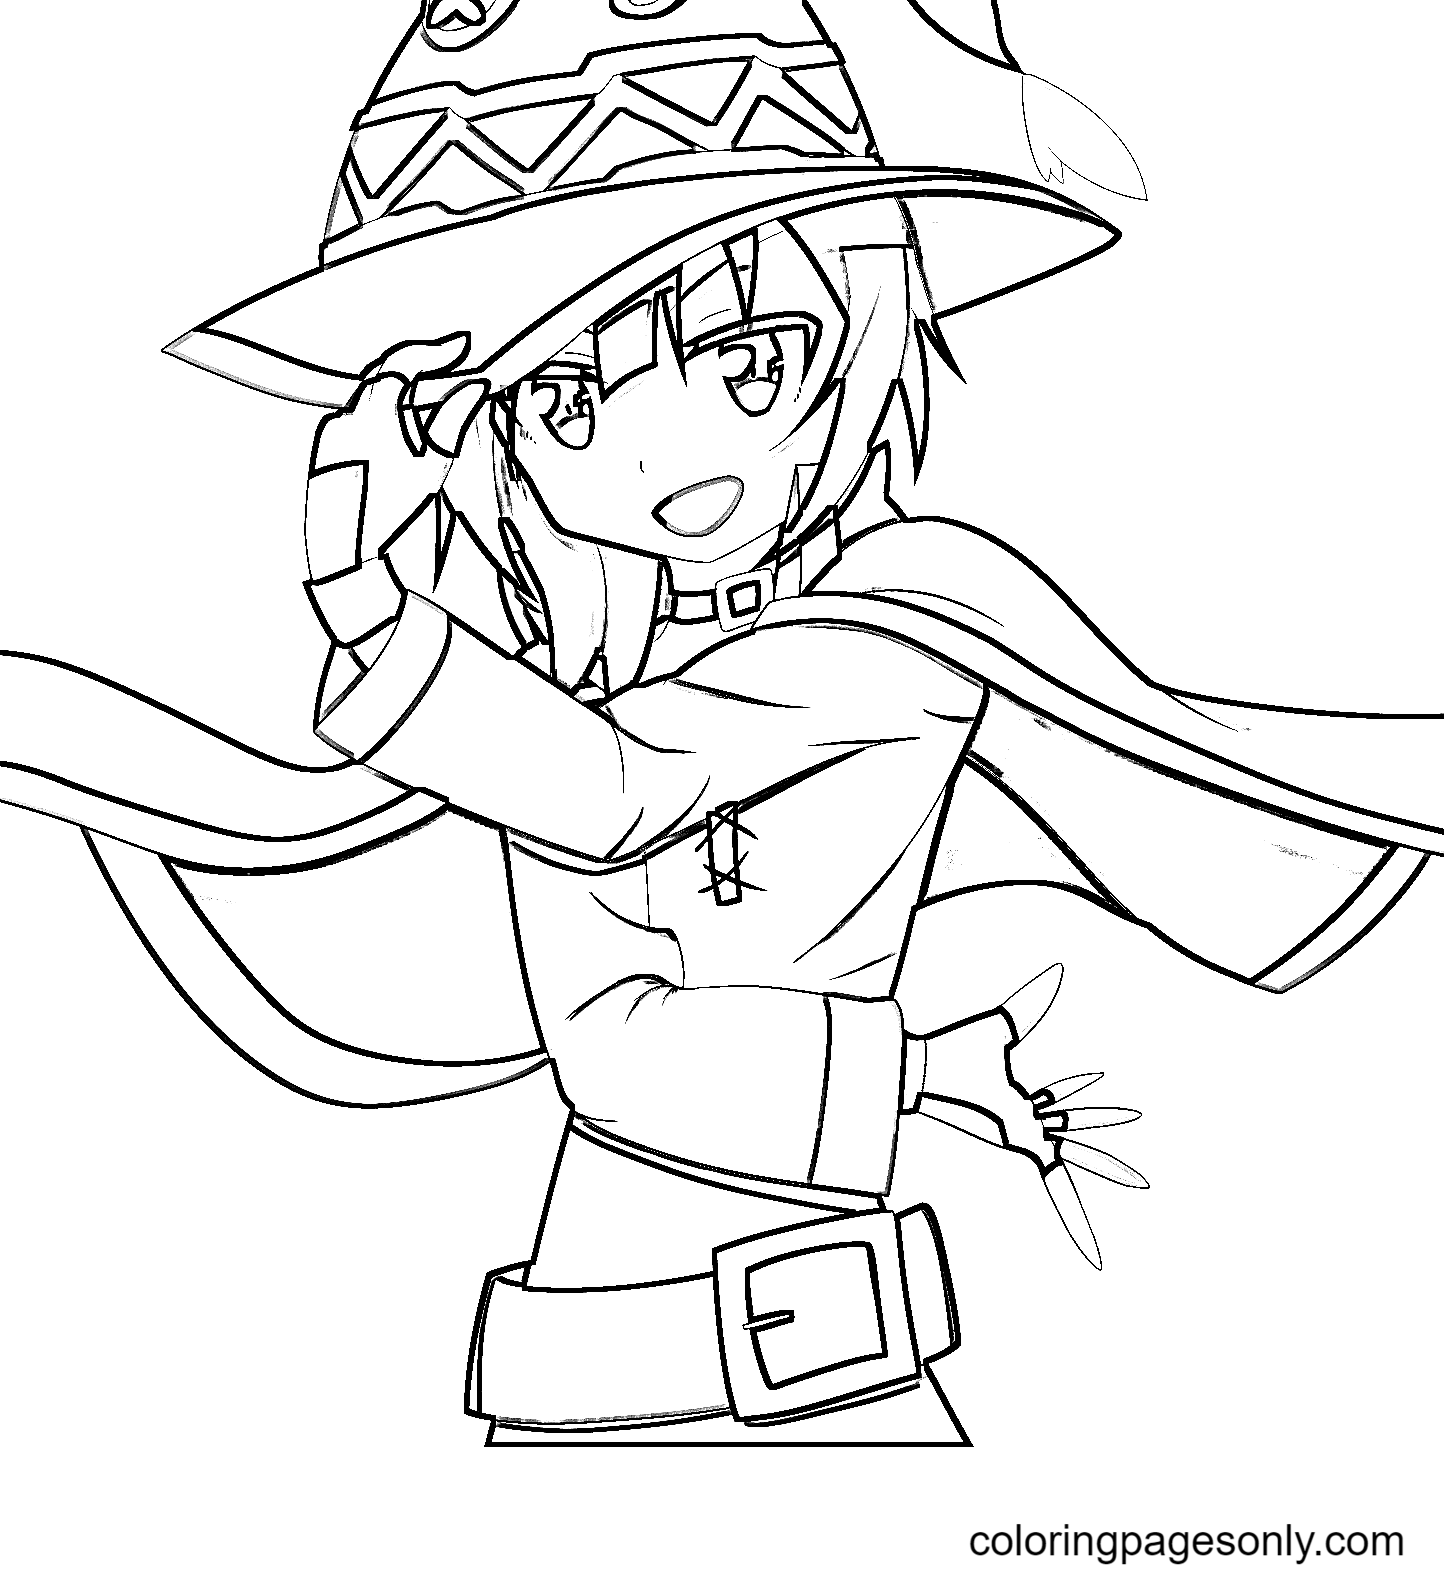 Megumin from KonoSuba Coloring Pages